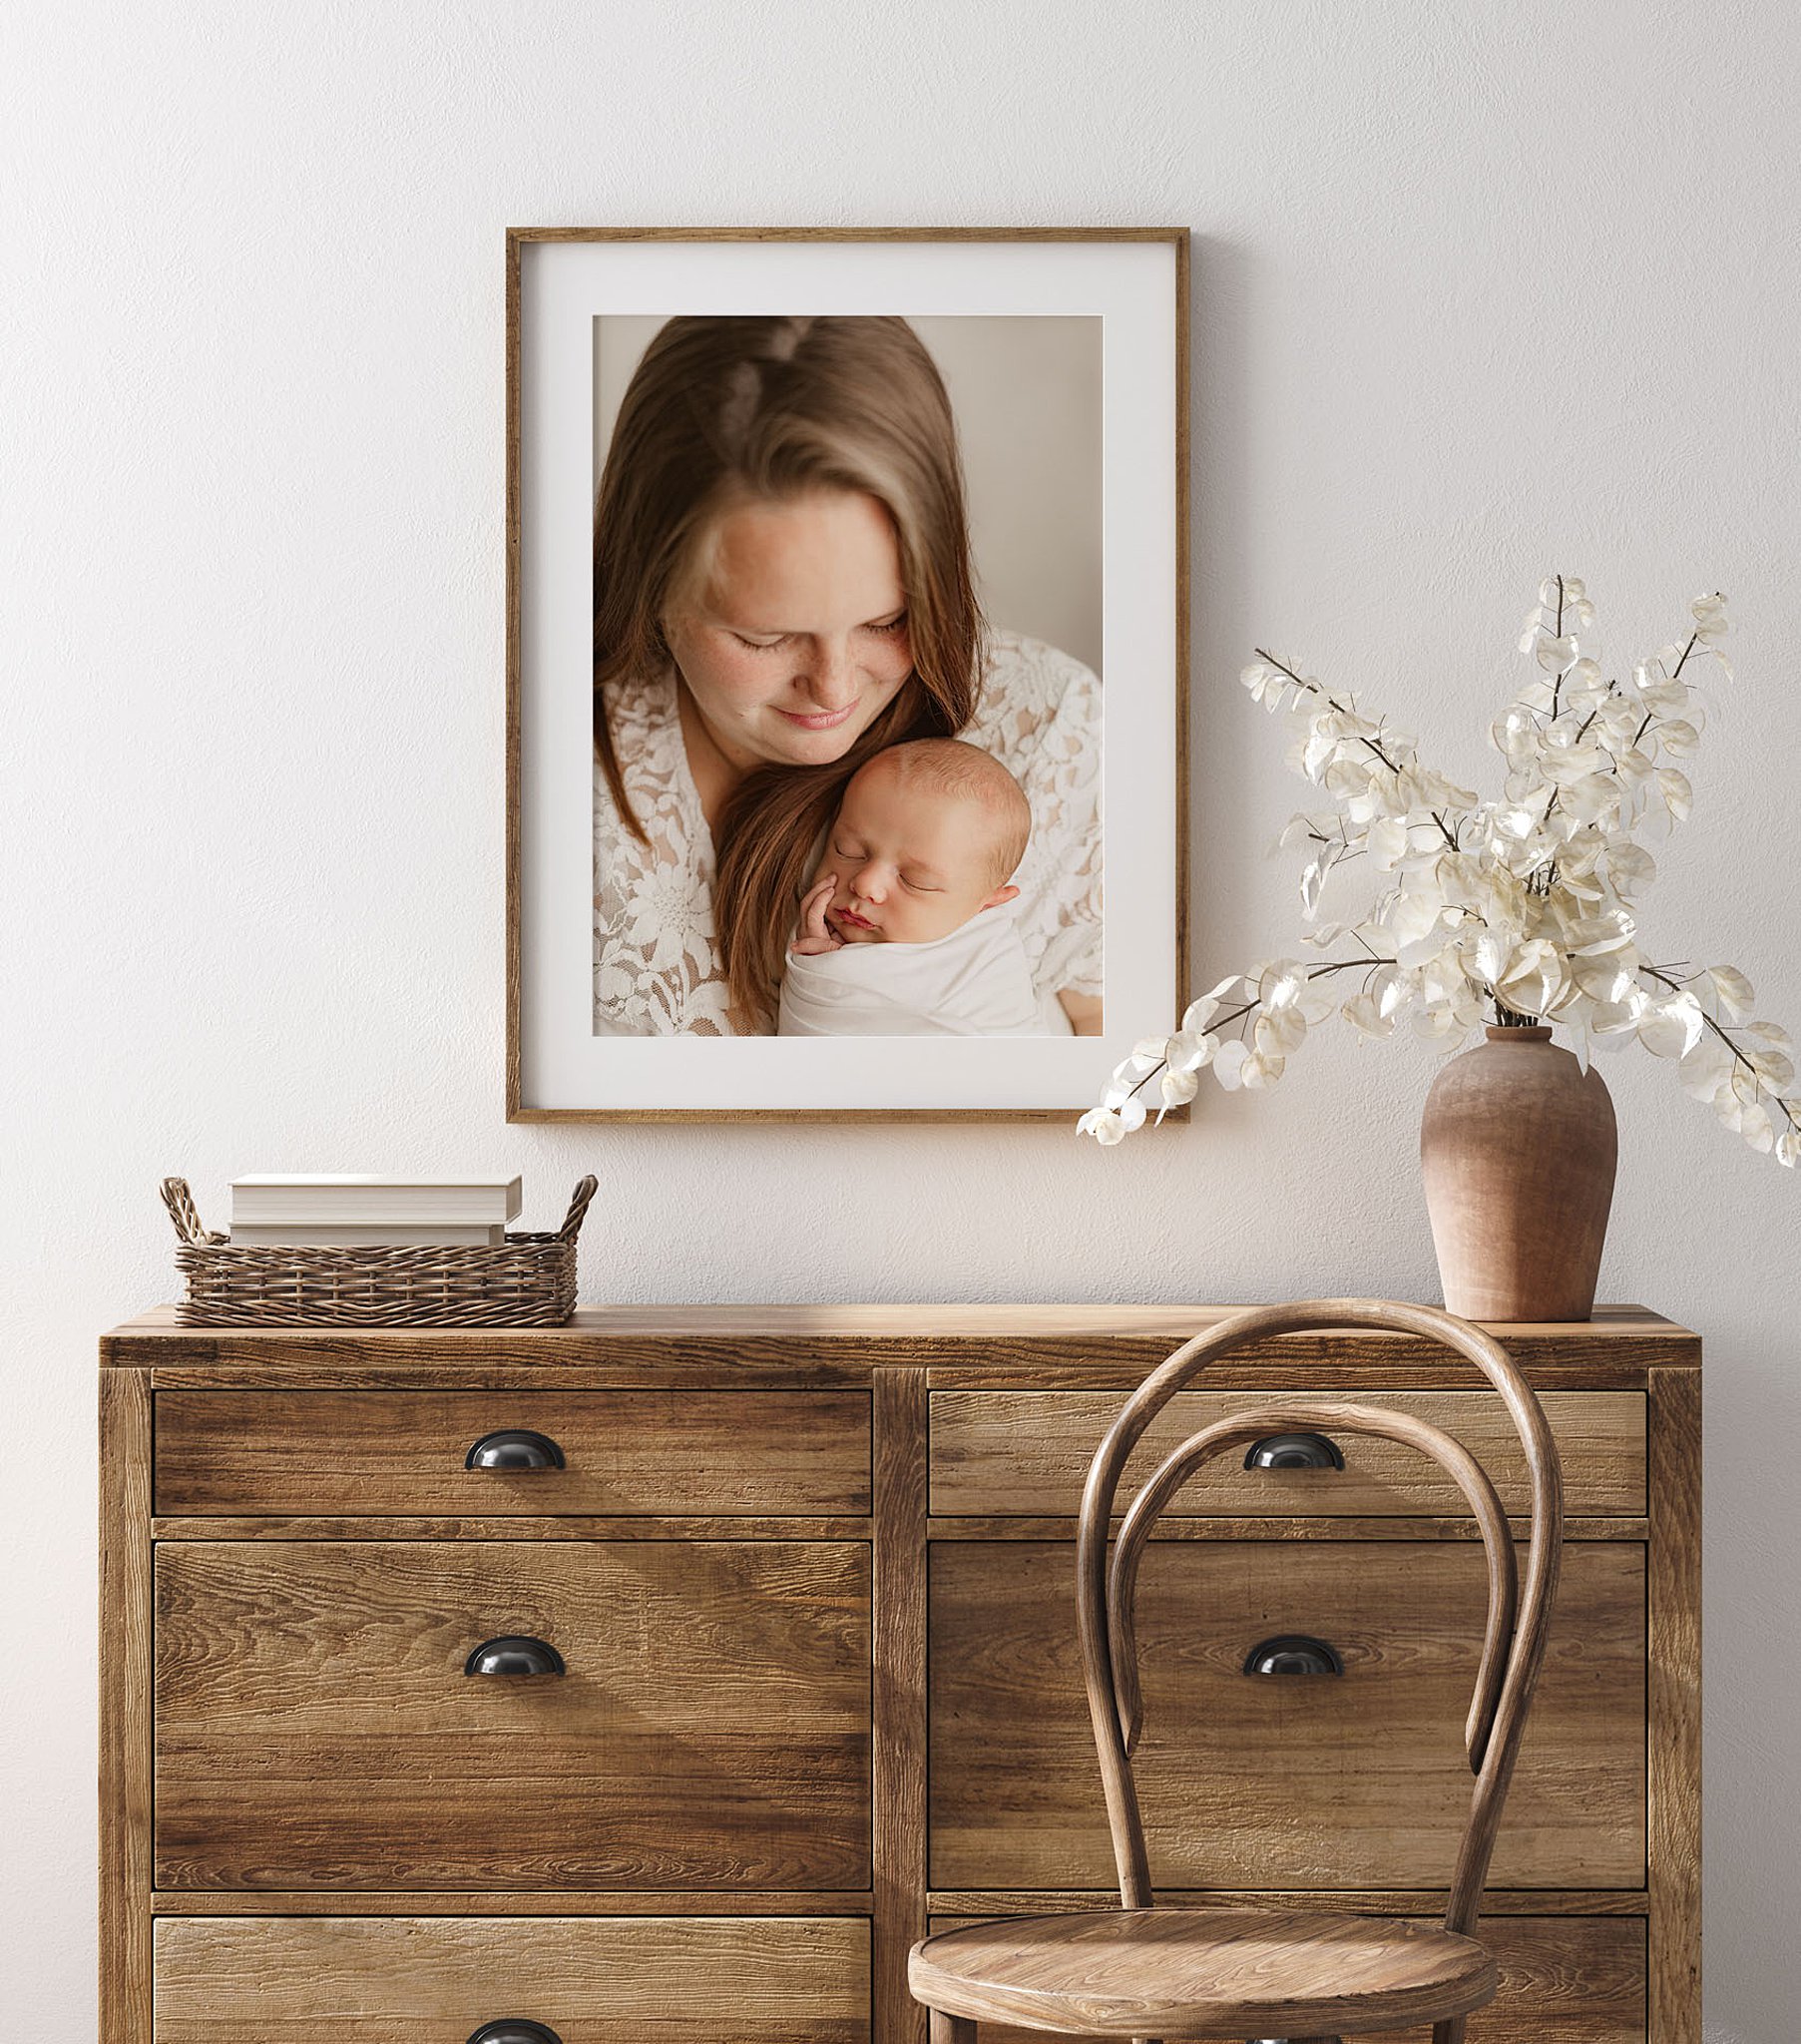 Artwork of a mom holding her sleeping newborn hangs above wooden drawers